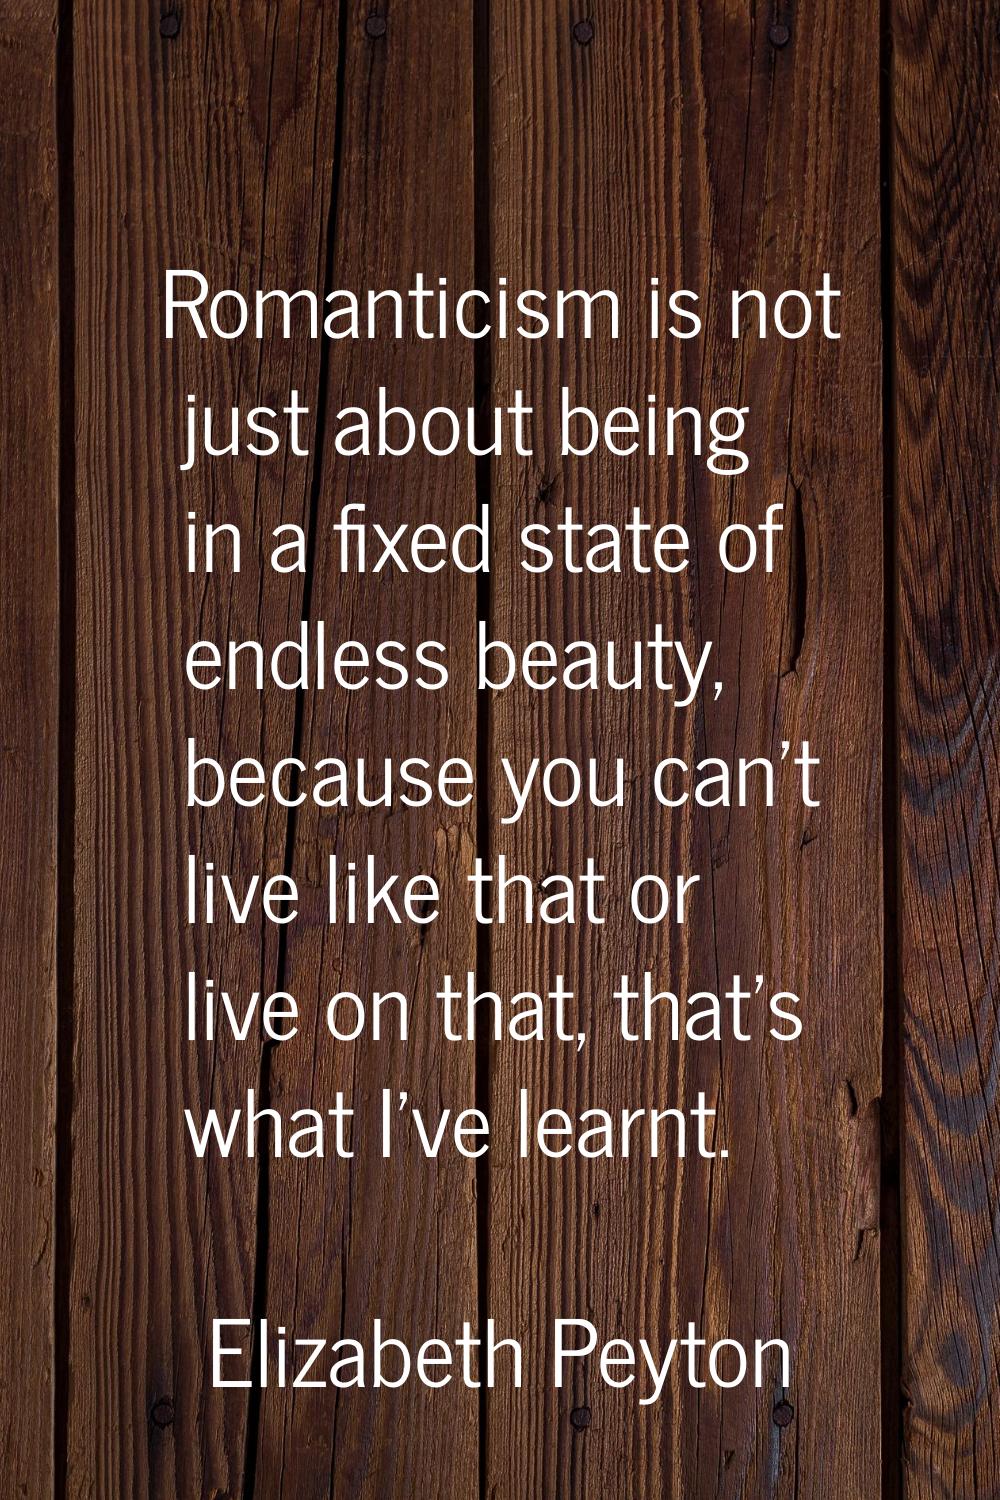 Romanticism is not just about being in a fixed state of endless beauty, because you can't live like